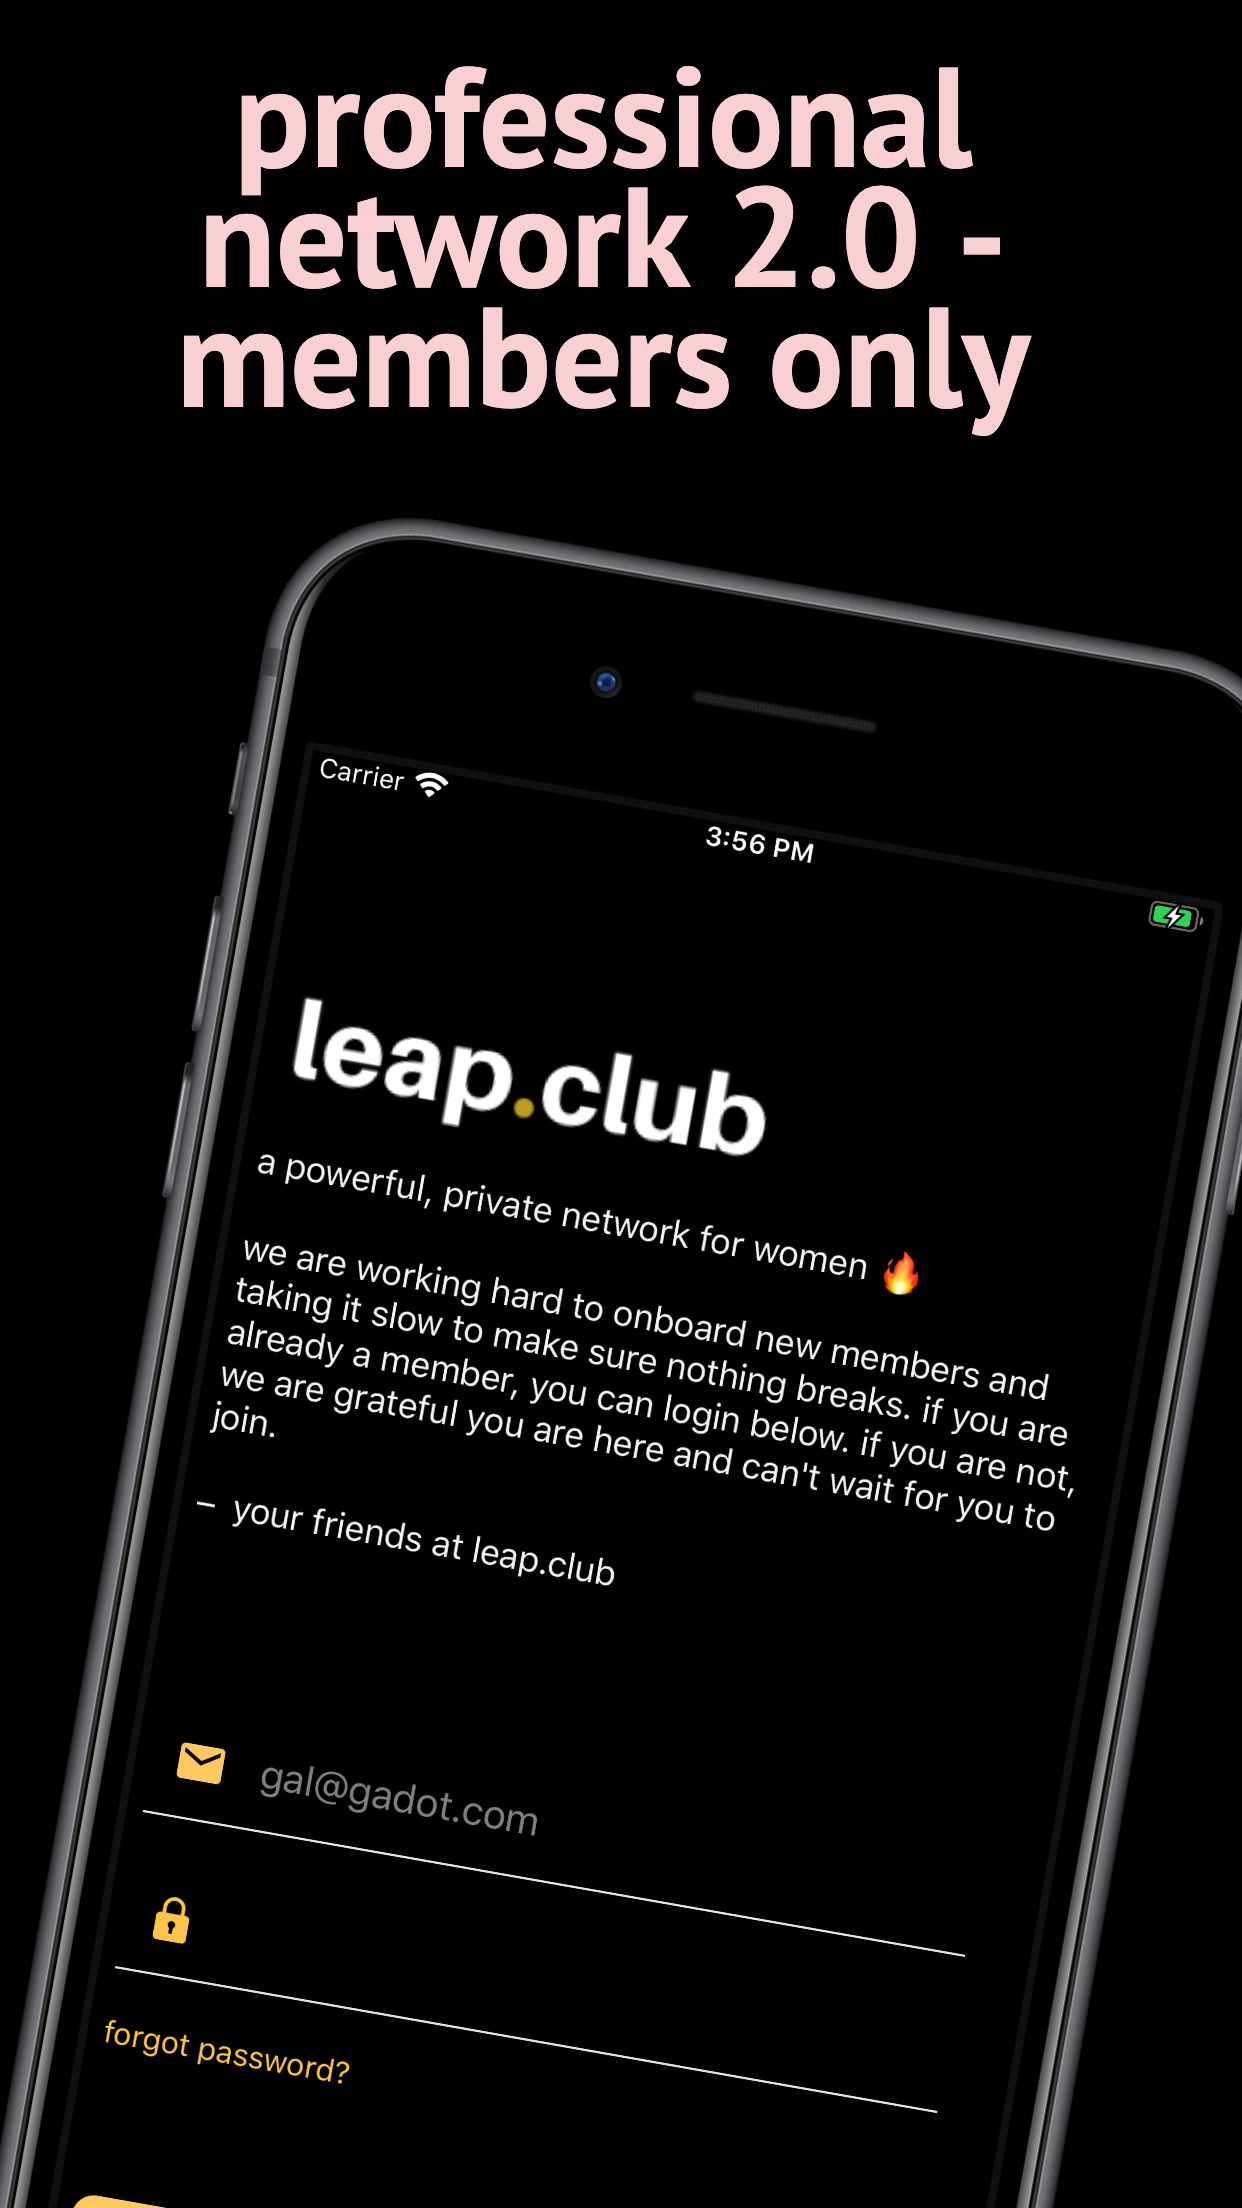 So we turned 6 months old - leap.club blog